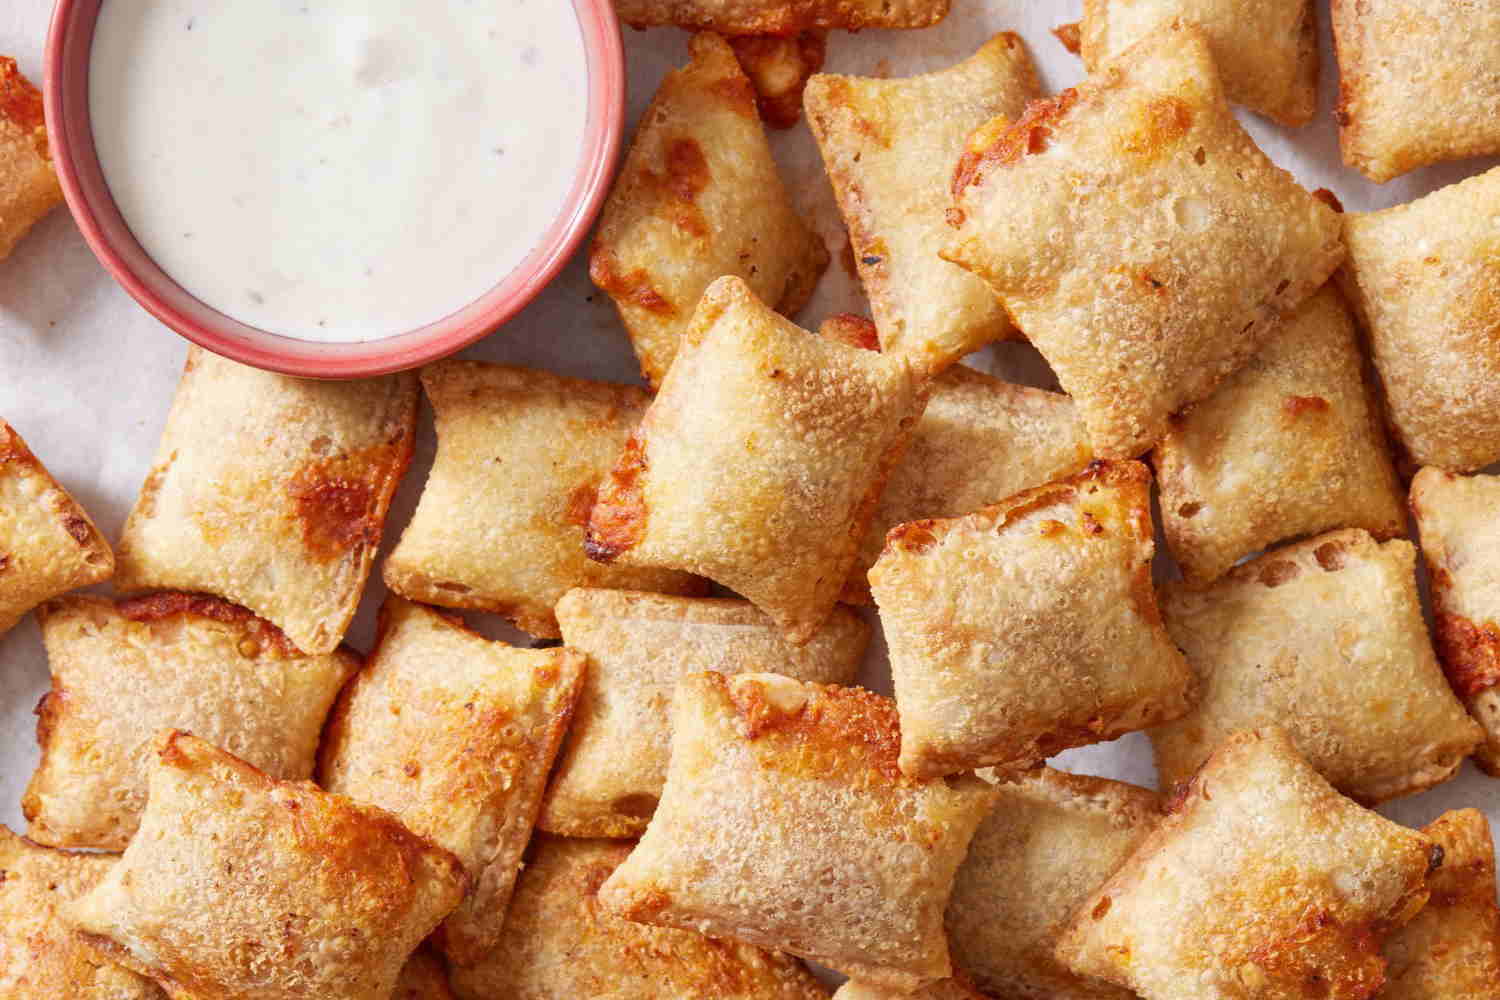 Why Cook Frozen Pizza Rolls In The Air Fryer?